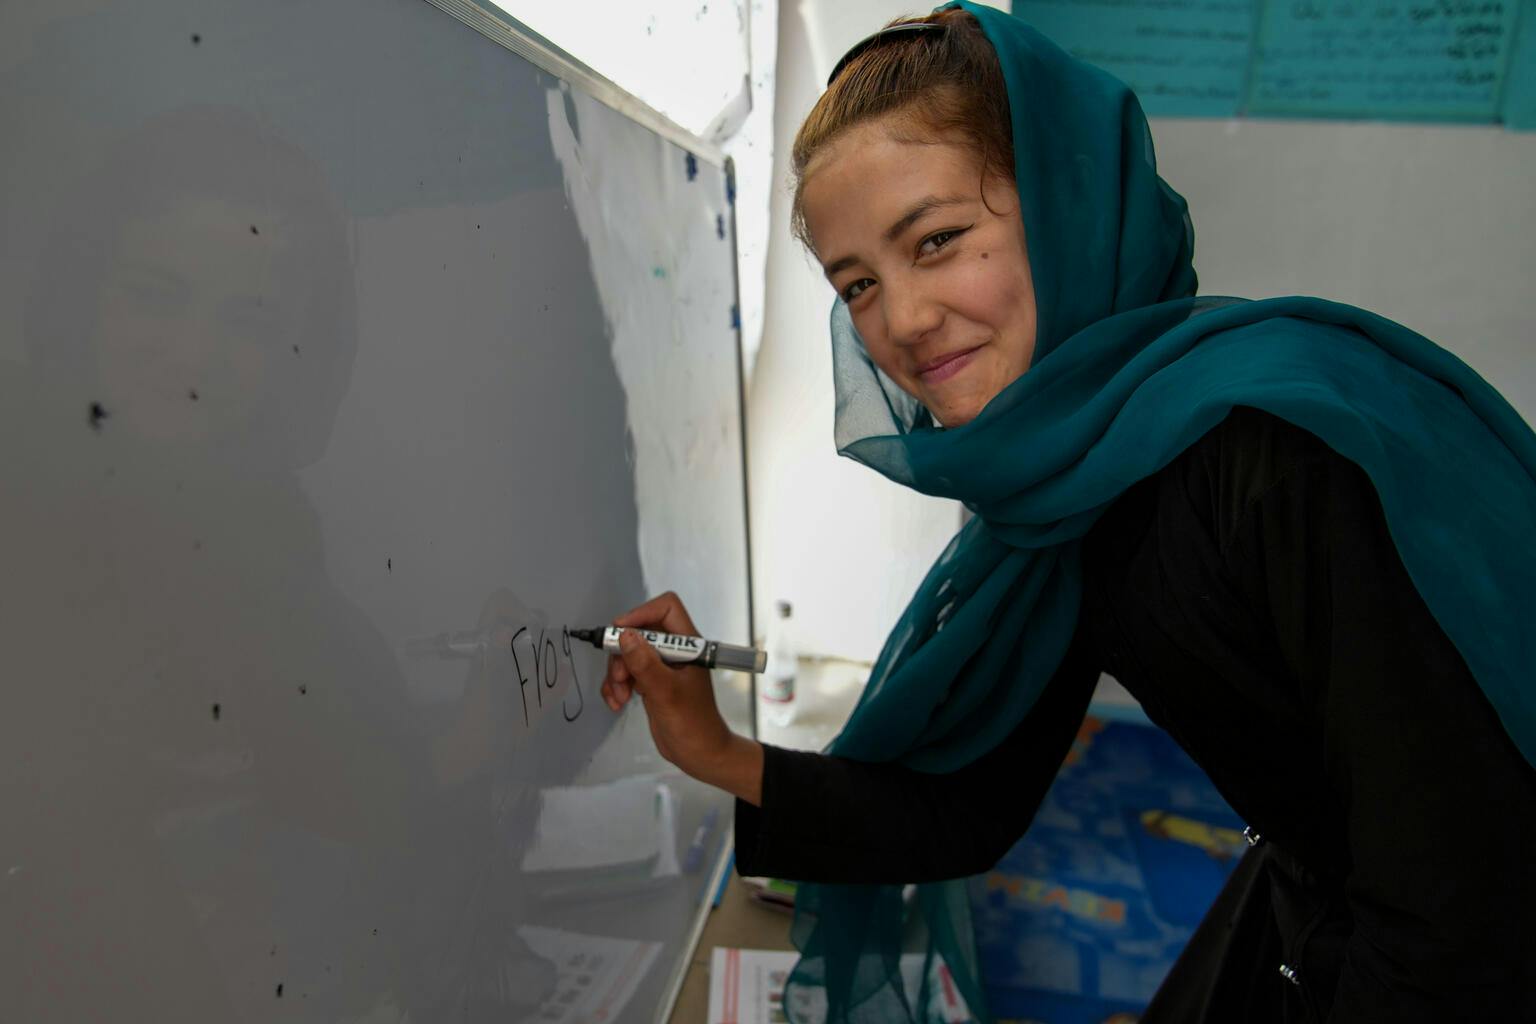 Building back better after emergency strikes - Education for girls in Afghanistan